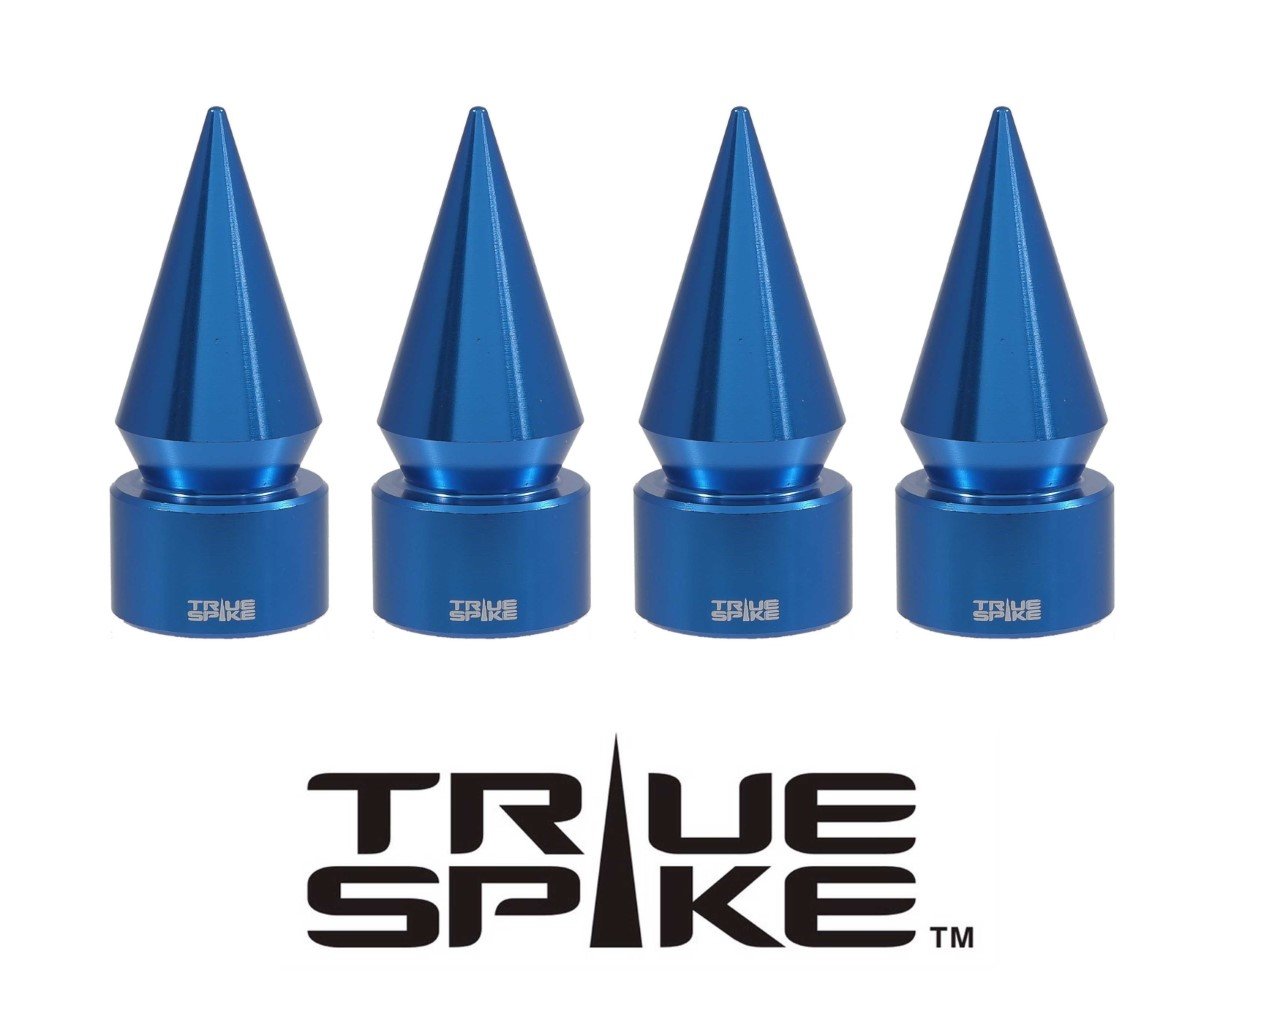 True Spike TPMS (TIRE PRESSURE MONITORING SYSTEM) SPIKE BILLET ALUMINUM AIR TIRE RIM WHEEL VALVE STEM CAP COVER KIT AVAILABLE IN MANY COLORS // PART # WVC003 - Tires and Engine Performance